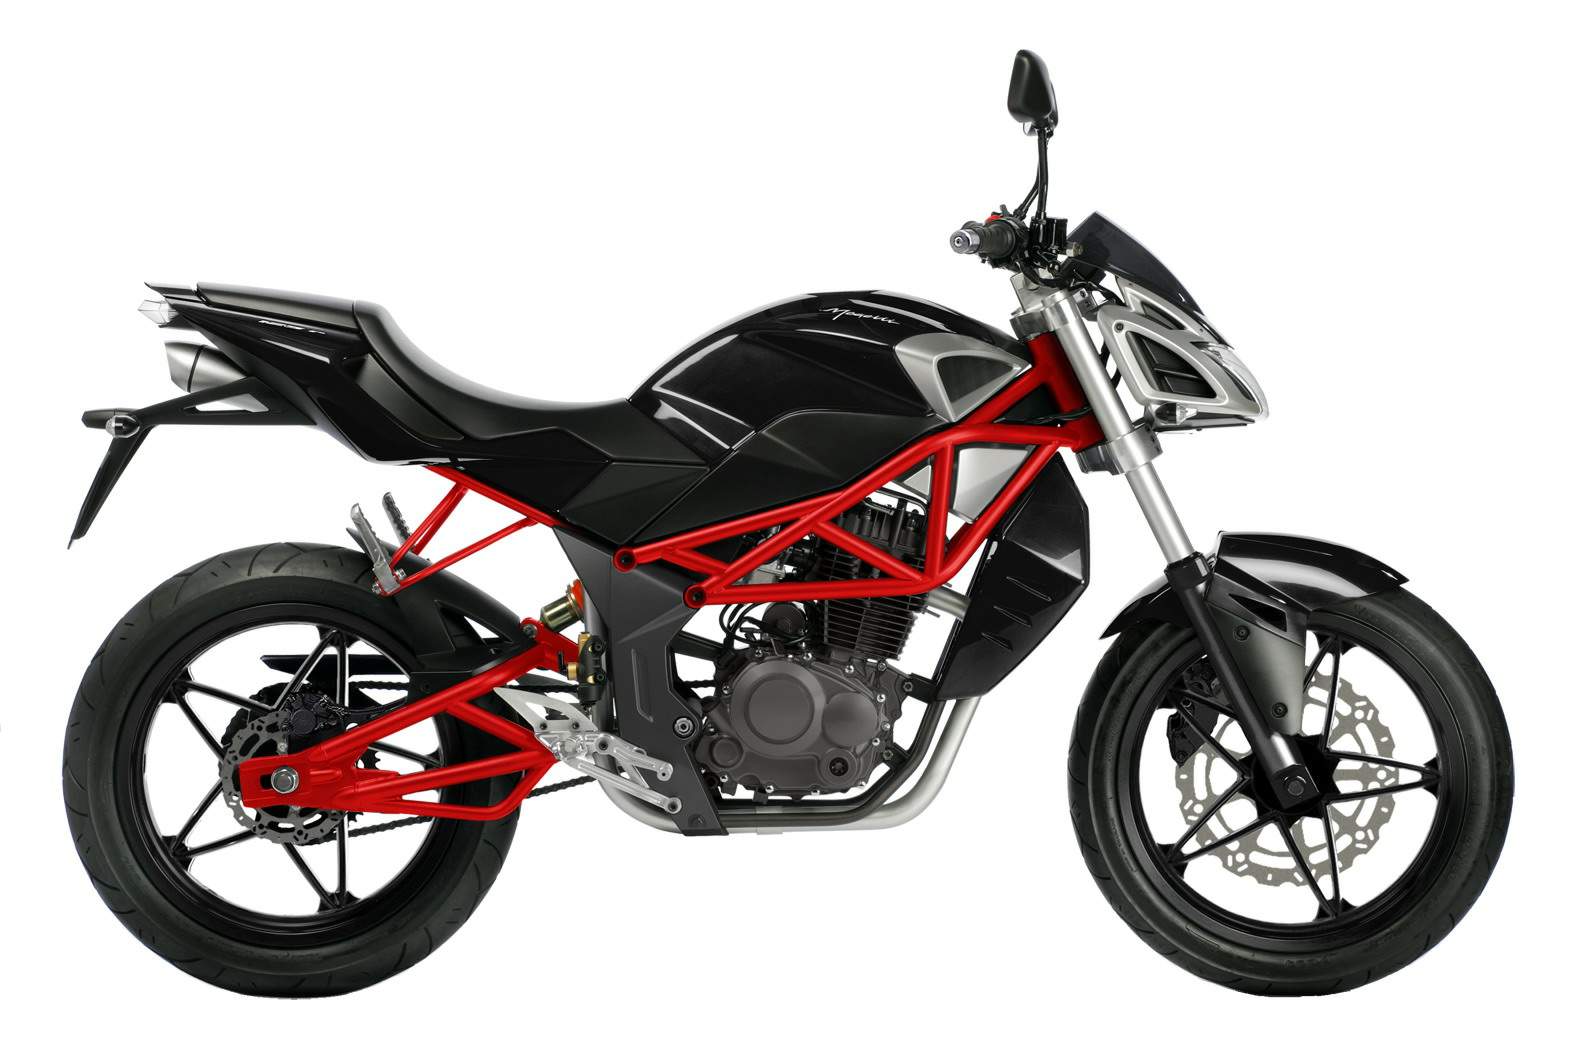 Megelli Naked 125 technical specifications